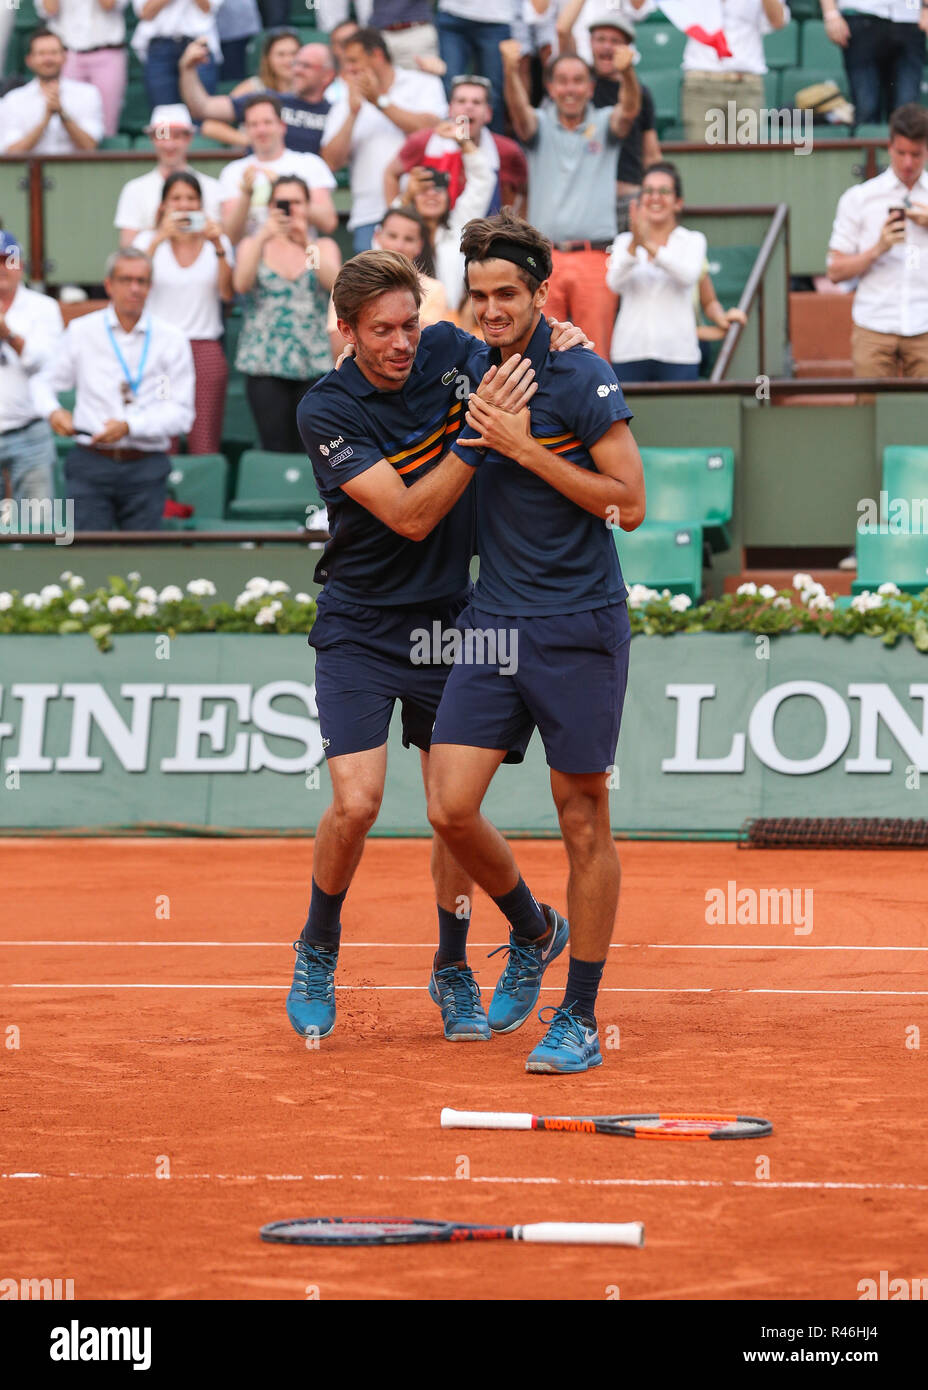 French tennis players Nicolas Mahut and Pierre-Hugues Herbert celebrating  victory at the French Open 2018,Paris, France Stock Photo - Alamy